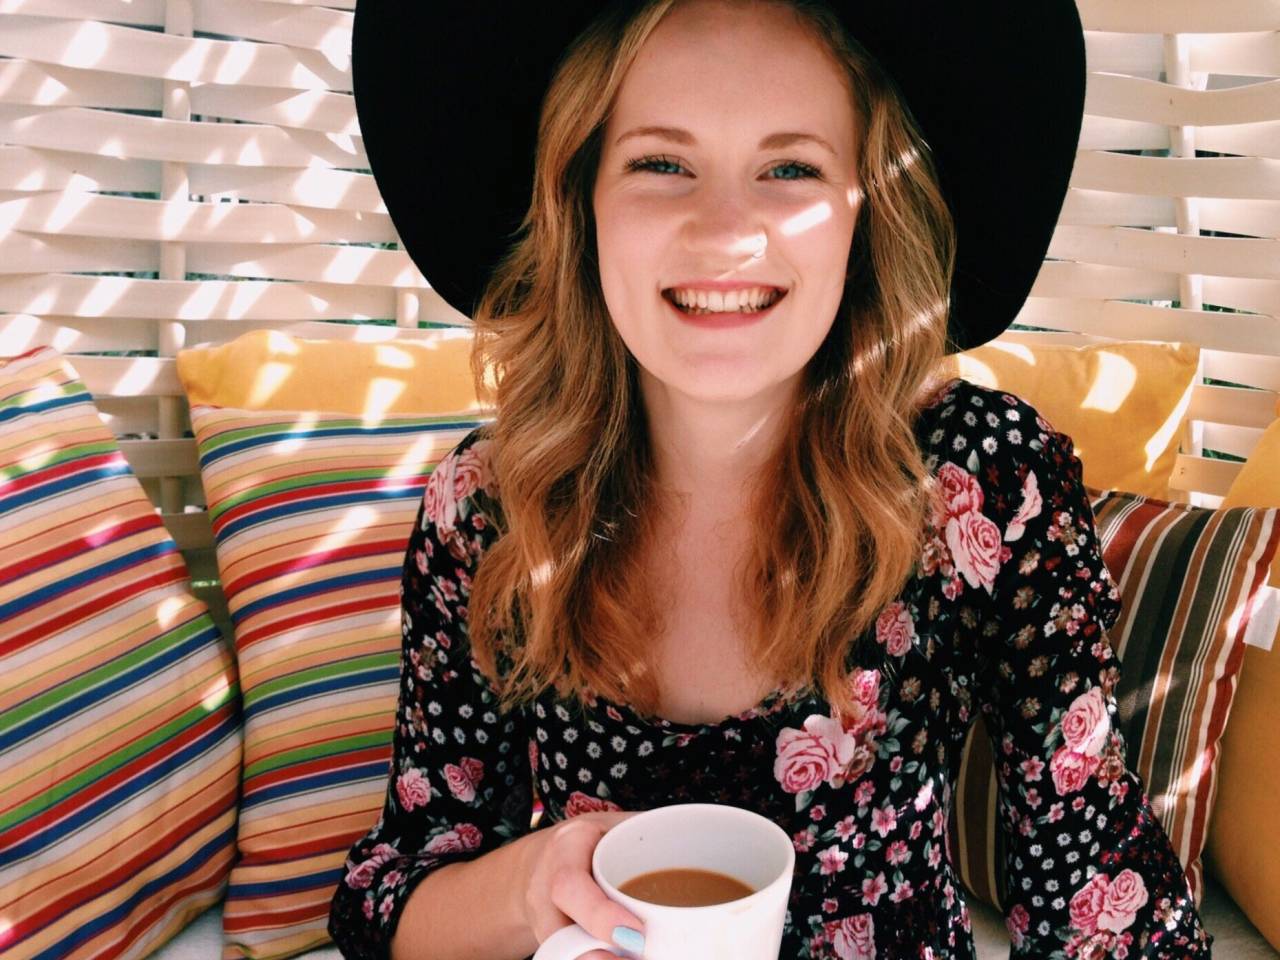 Young woman smiling and holding coffee.